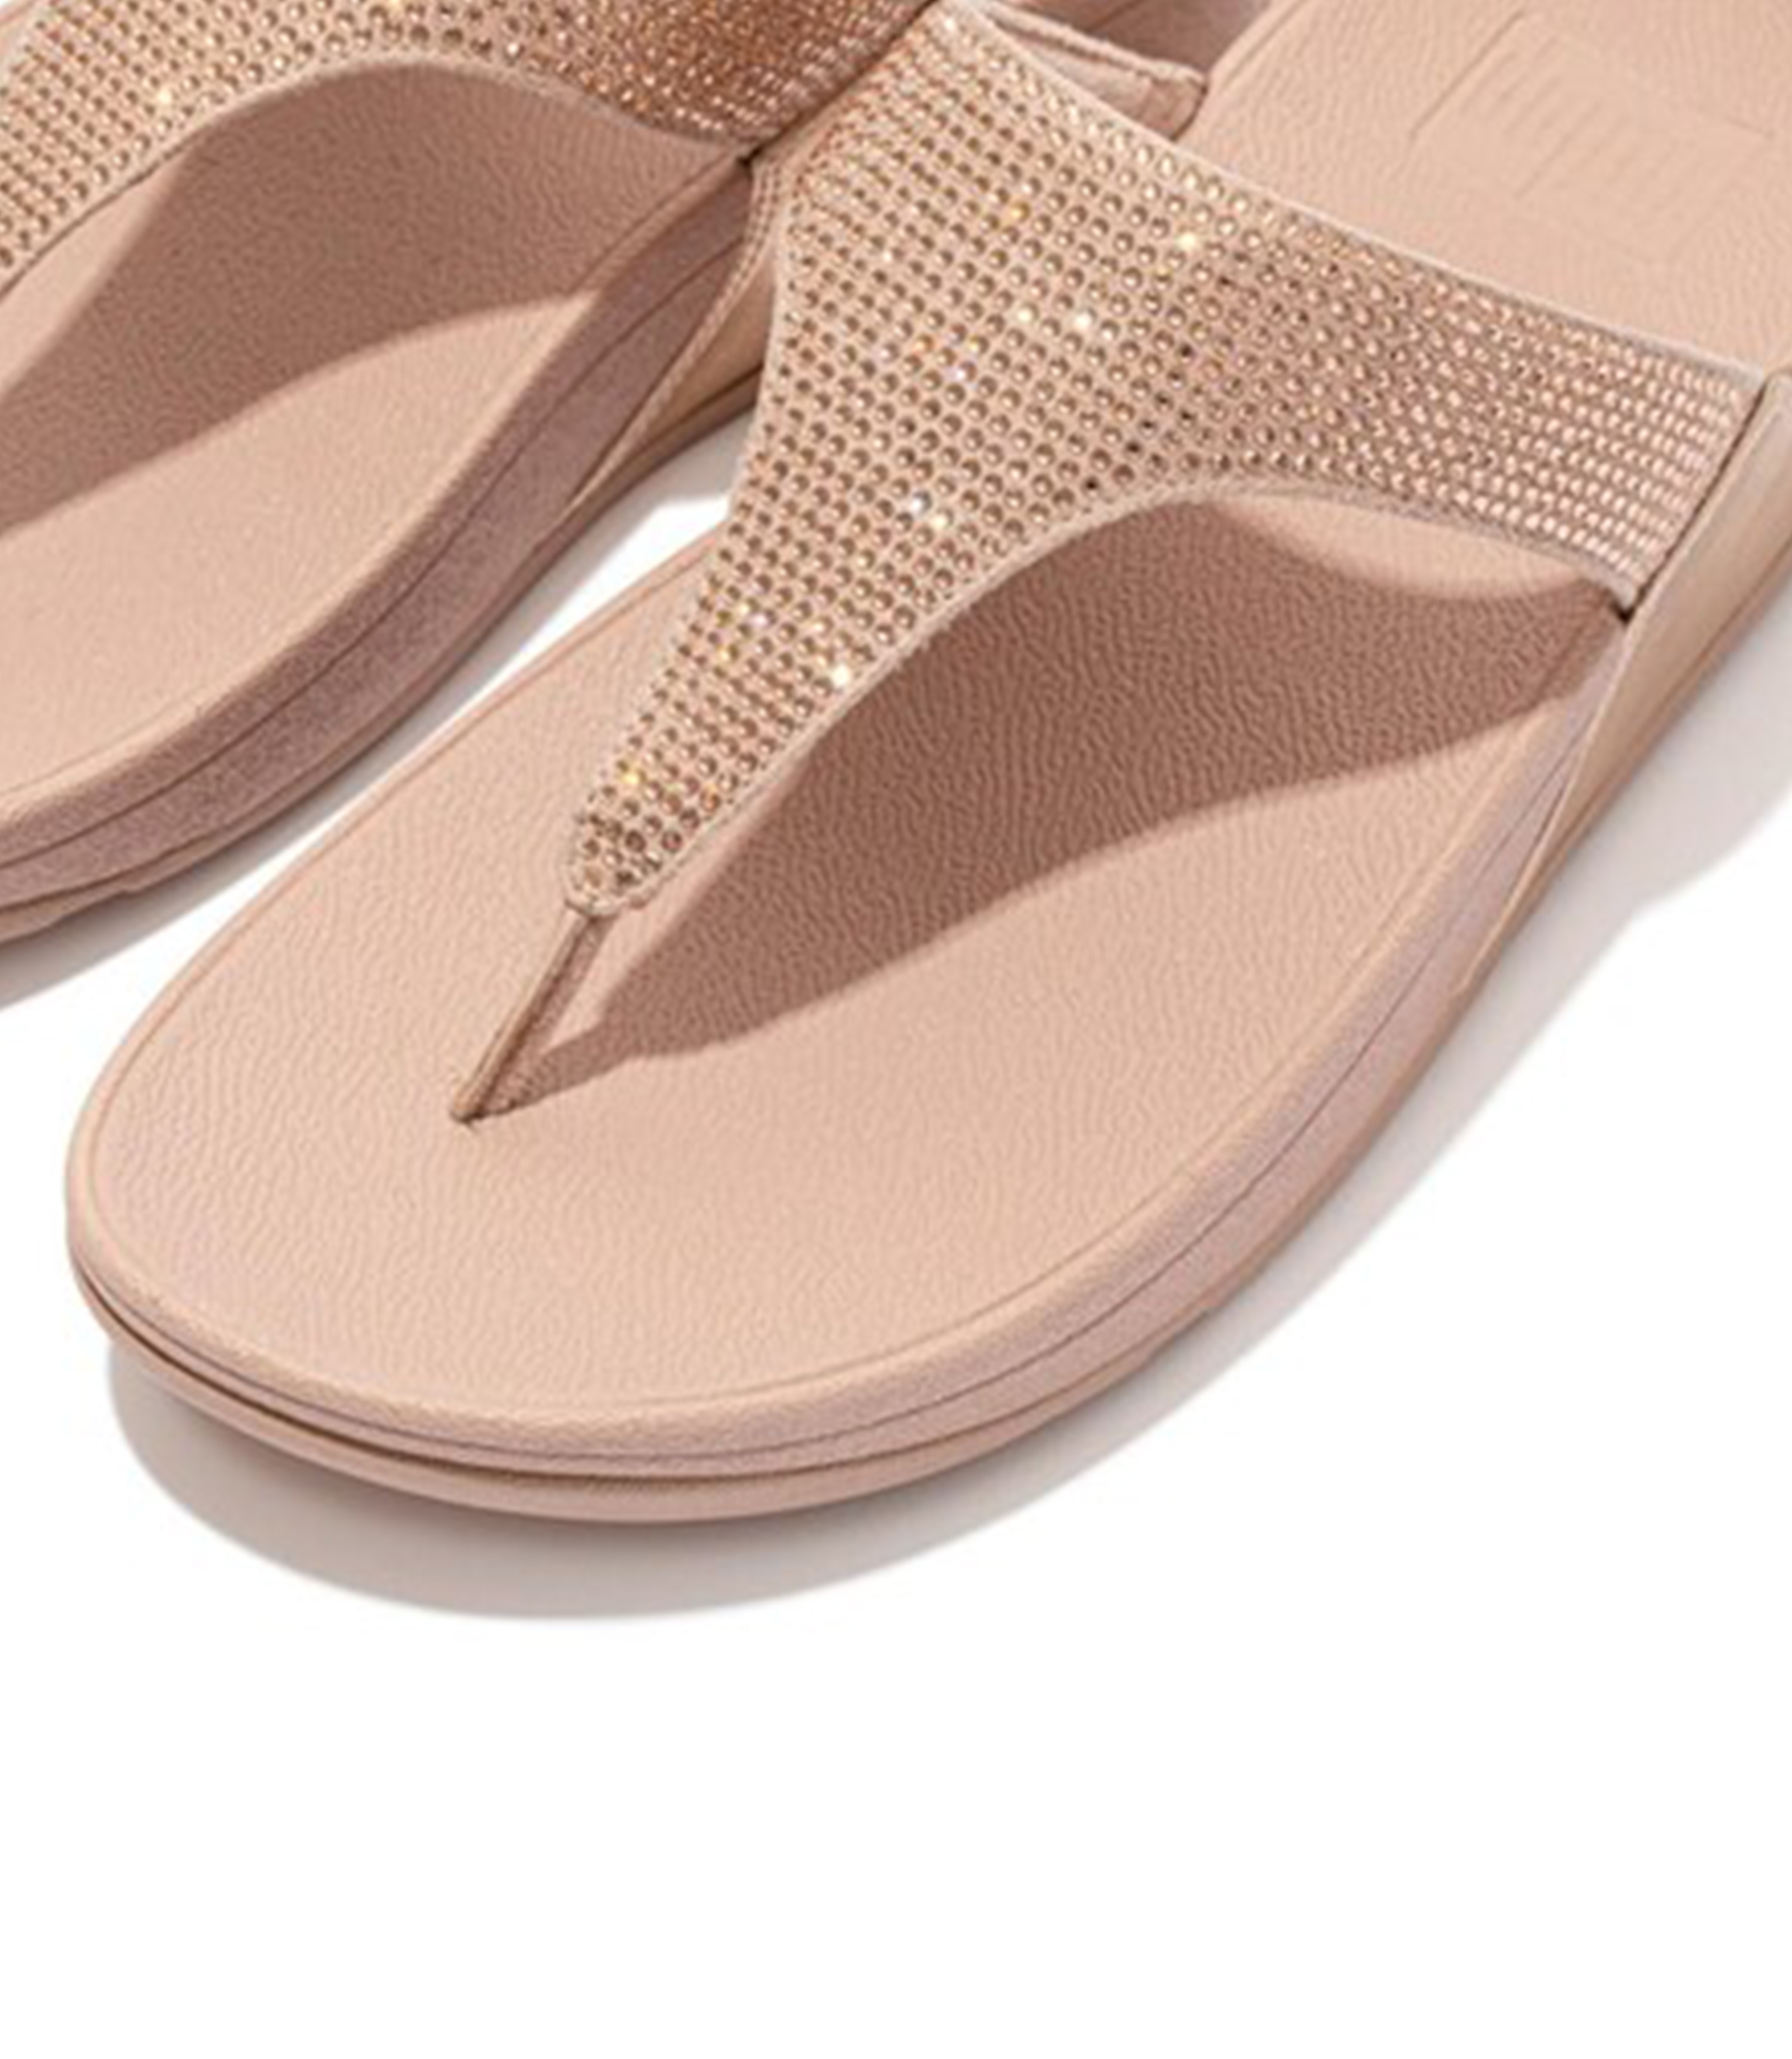 FitFlop 'Flare™' Slide Sandal | Nordstrom | Shoe boot sandals, Me too  shoes, Fitflop boots